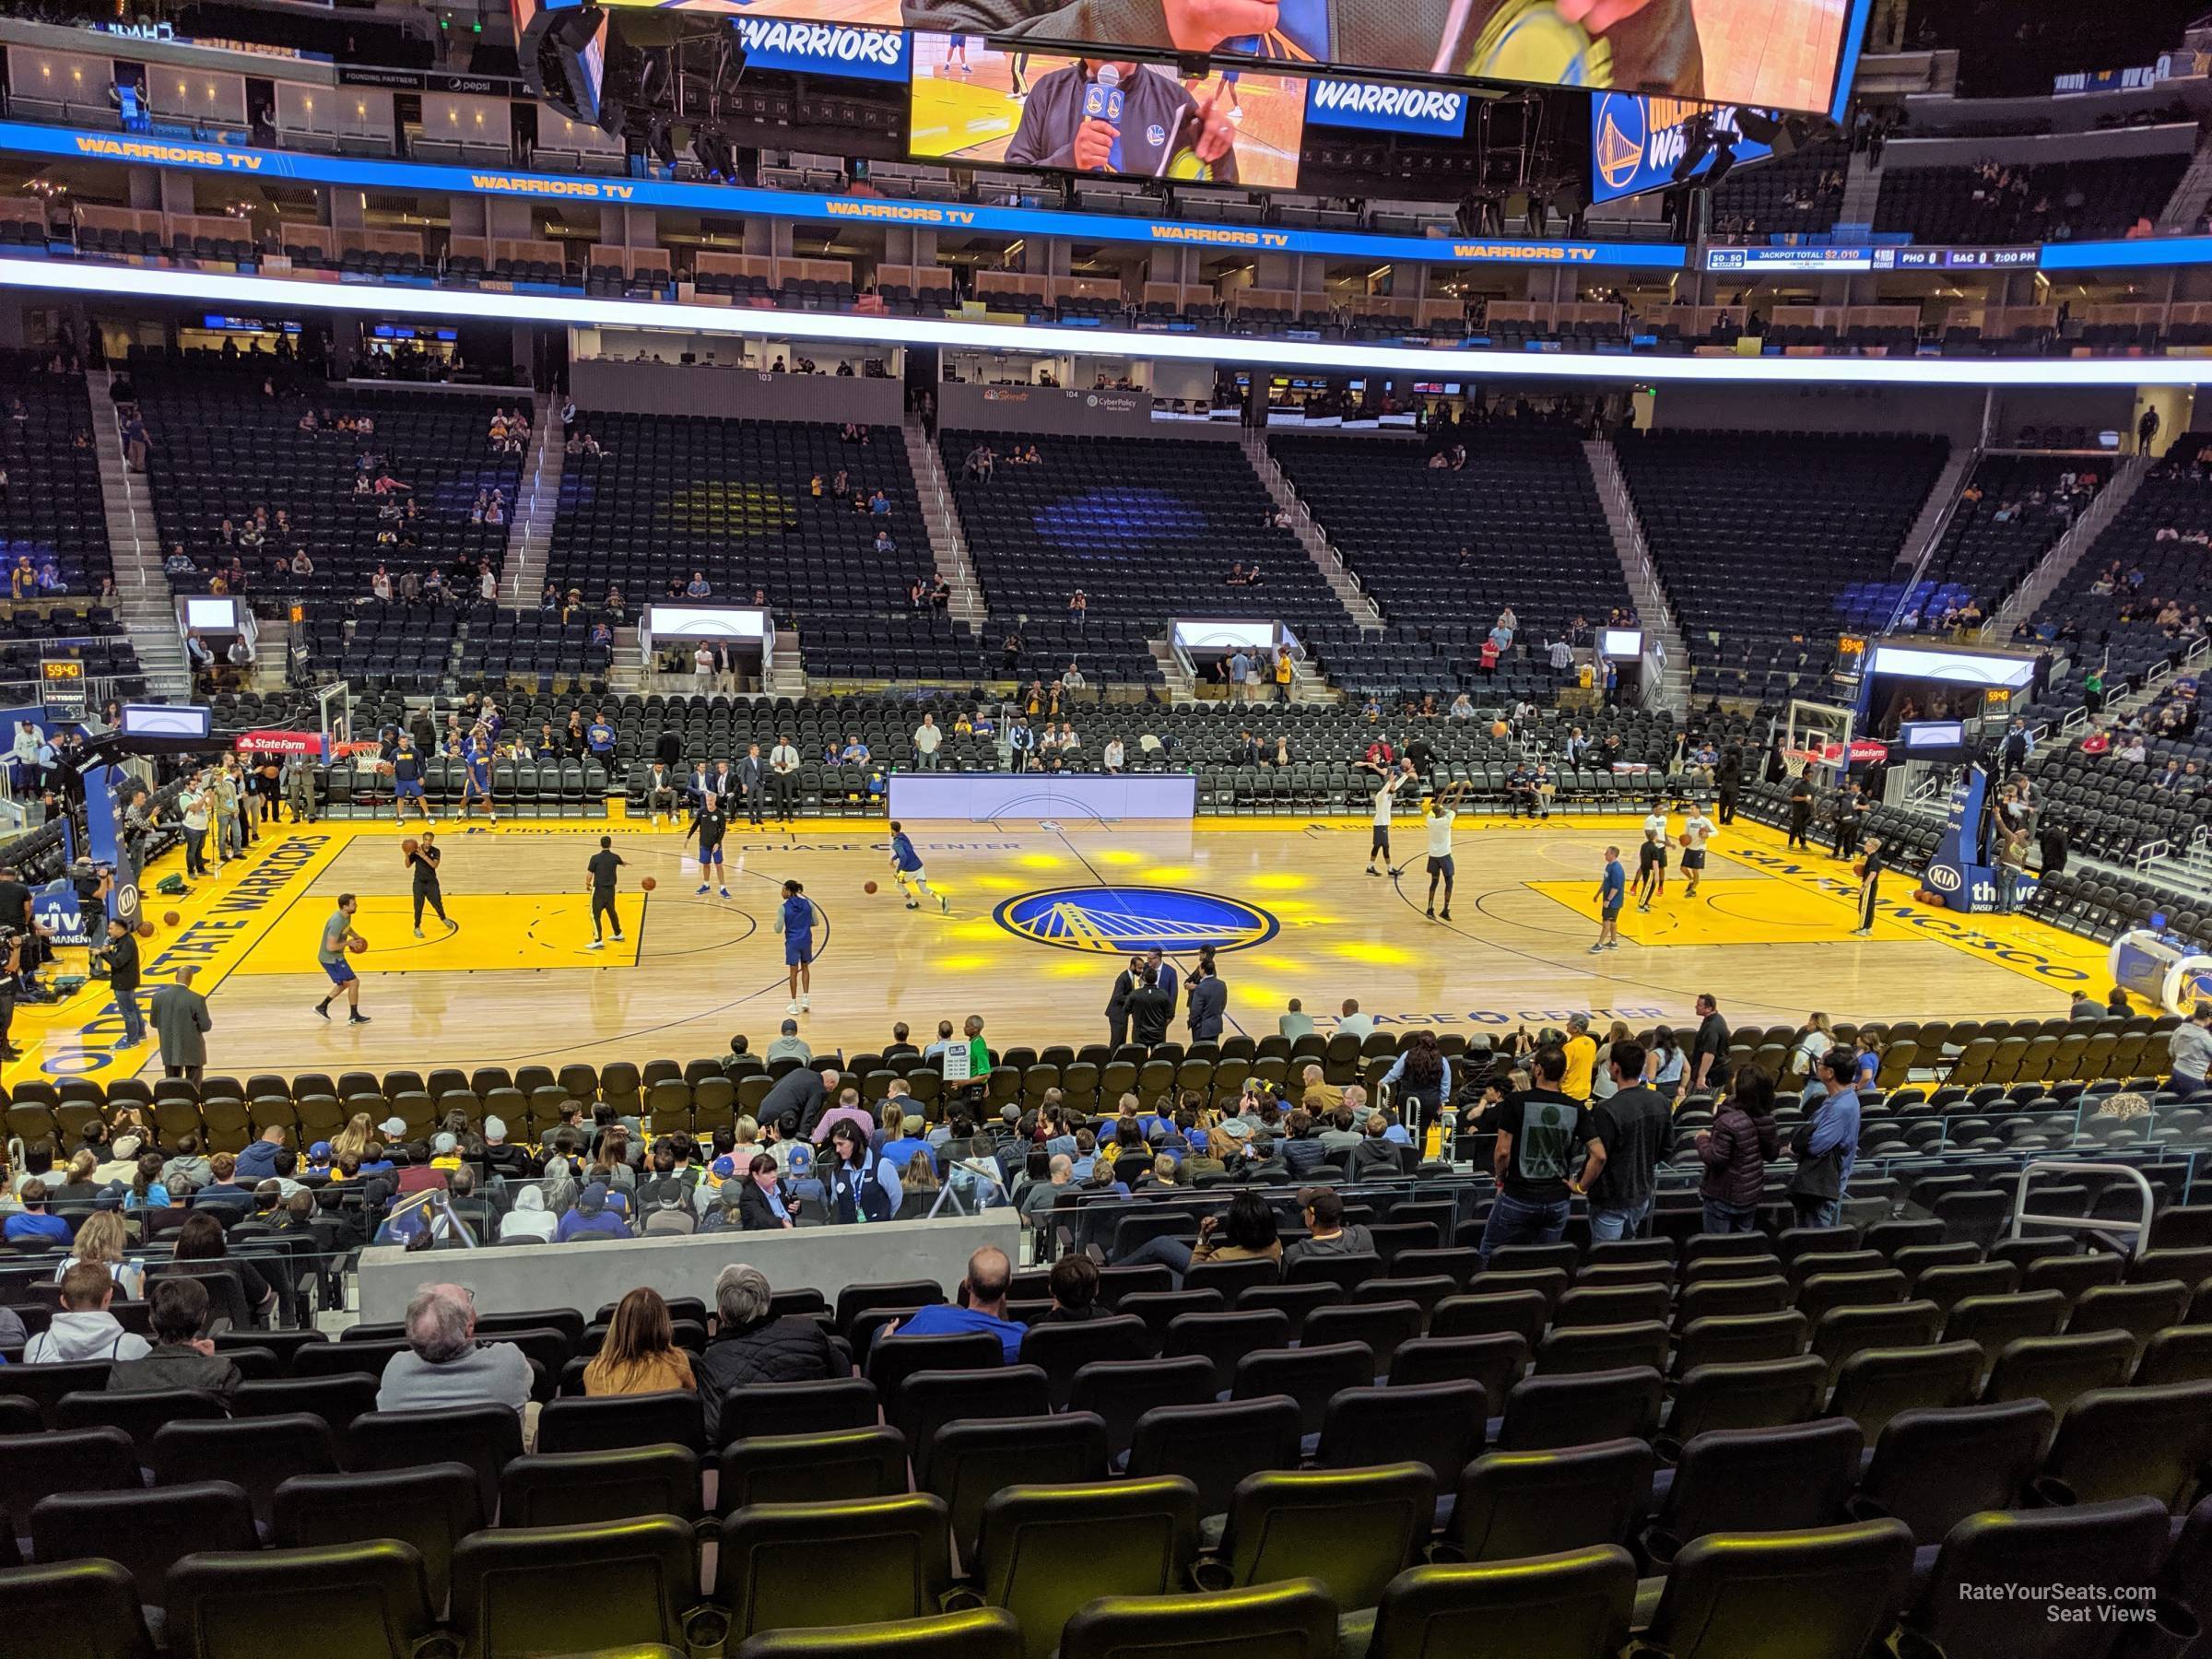 Section 104 at Chase Center Golden State Warriors RateYourSeats com